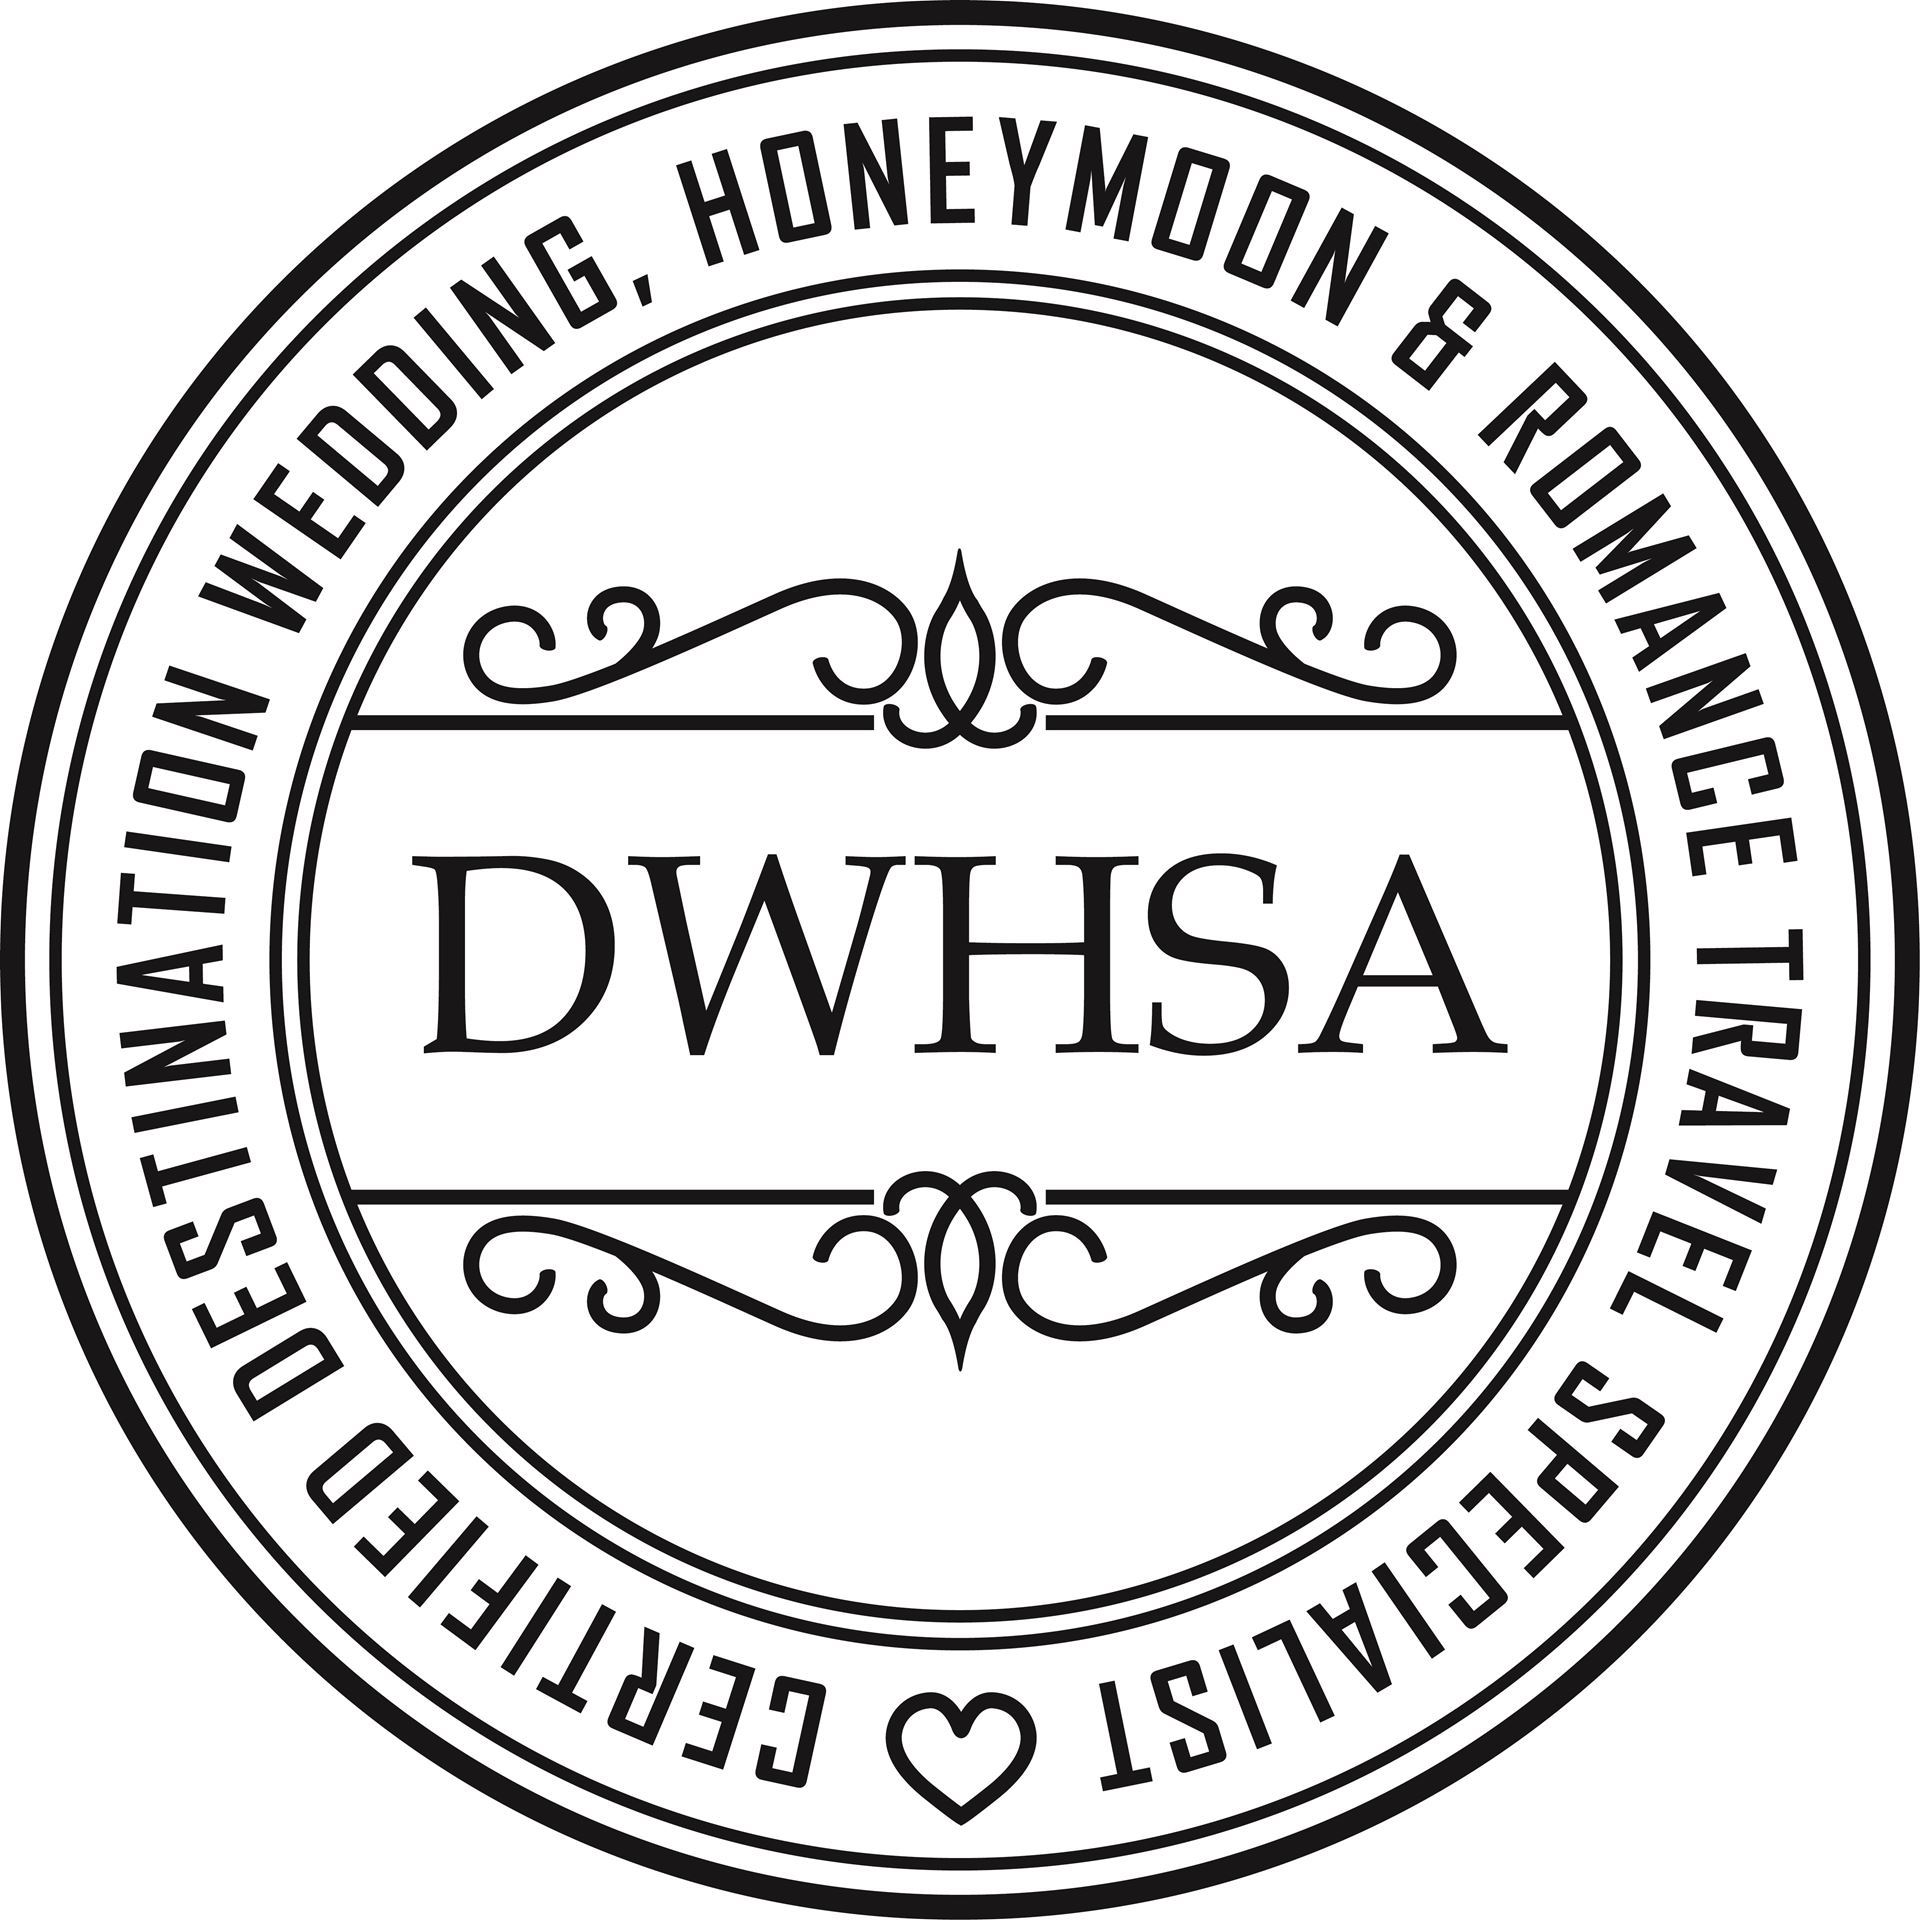 DWHSA-Updated certification logo 2017